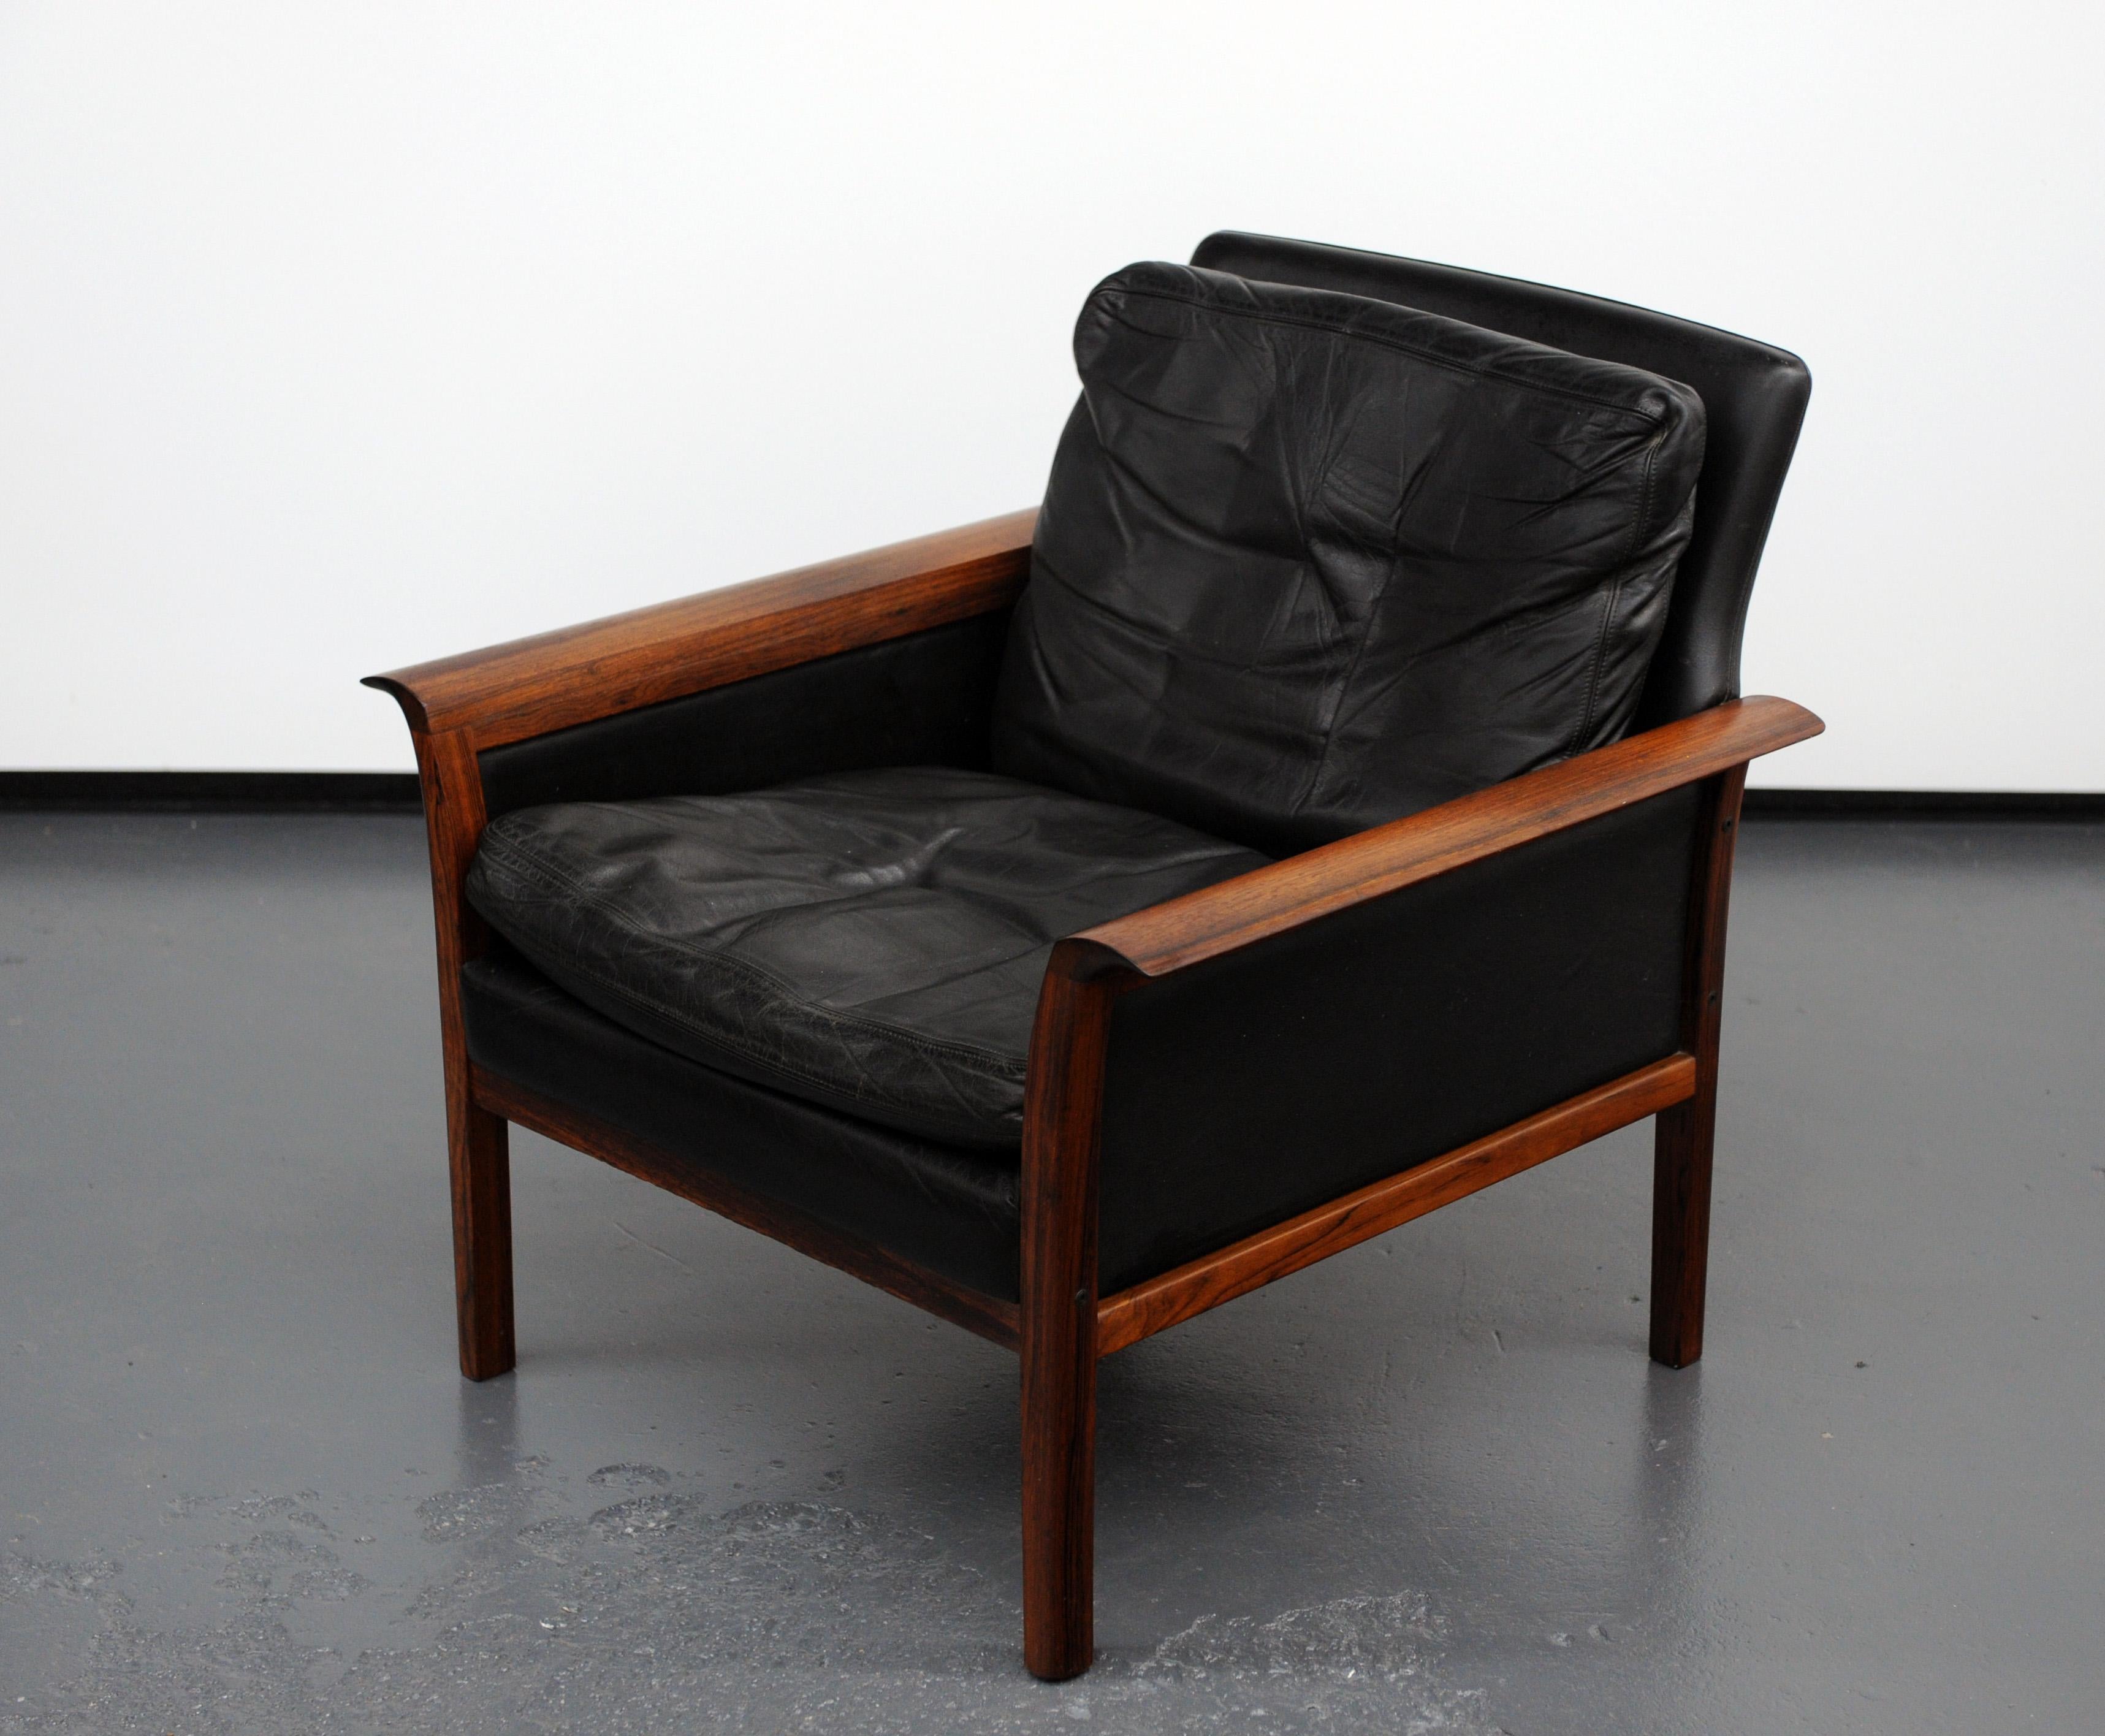 Appealing leather lounge chair will solid rosewood frame. Desirable design with beautiful curved rosewood armrests. Manufactured in the 1960s by Vatne Møbler of Norway, label to underside. Soft black leather with original down feather pillows.
 